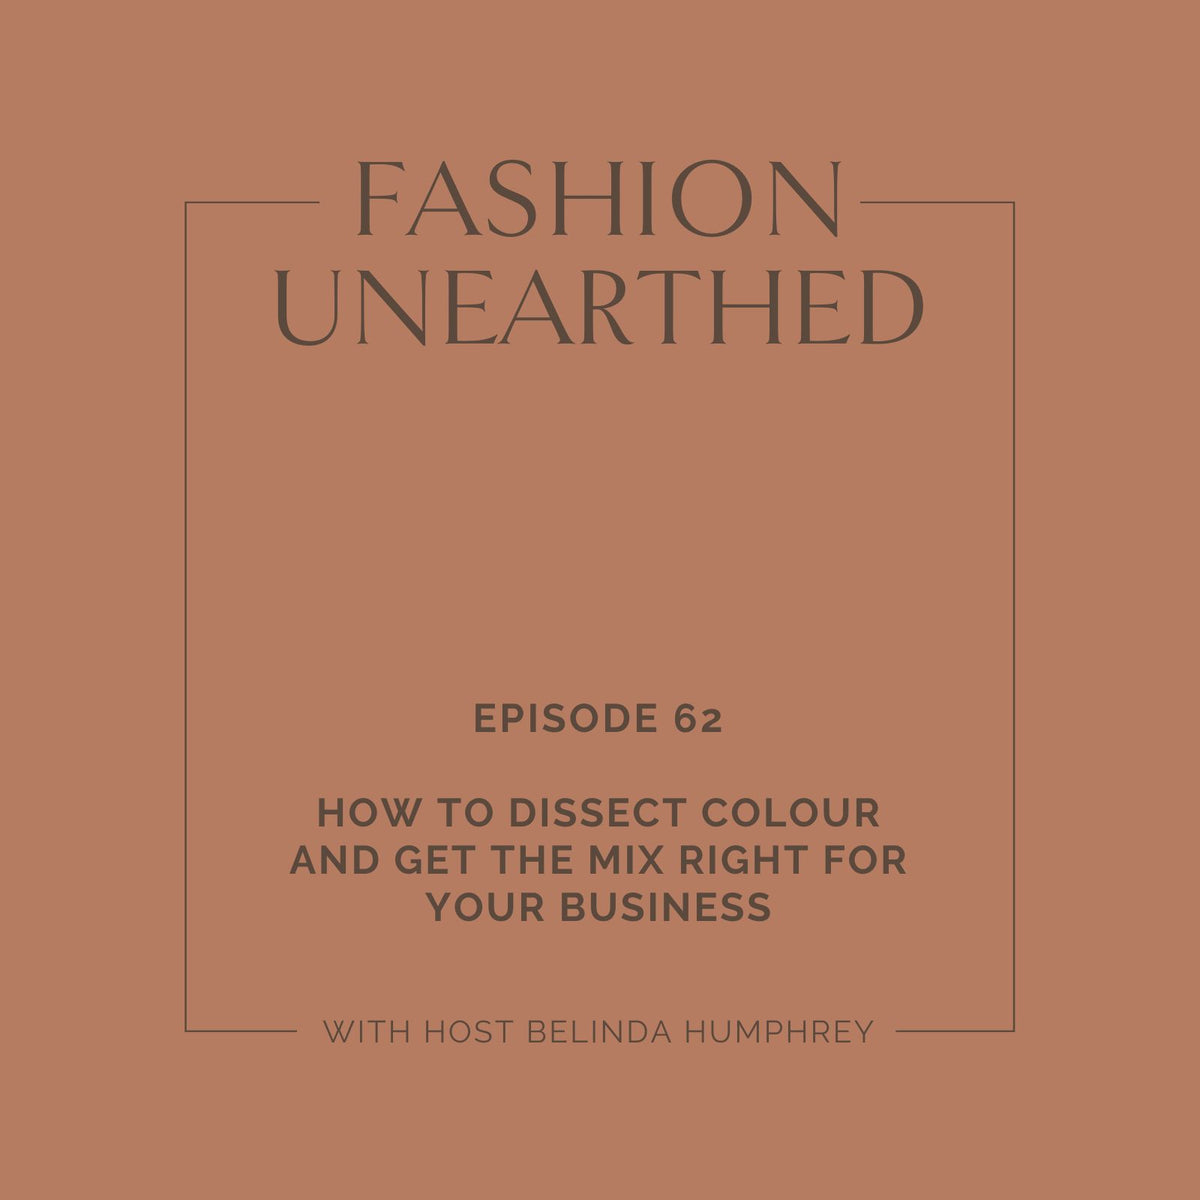 EPISODE 62: How to dissect colour and get the mix right for your business